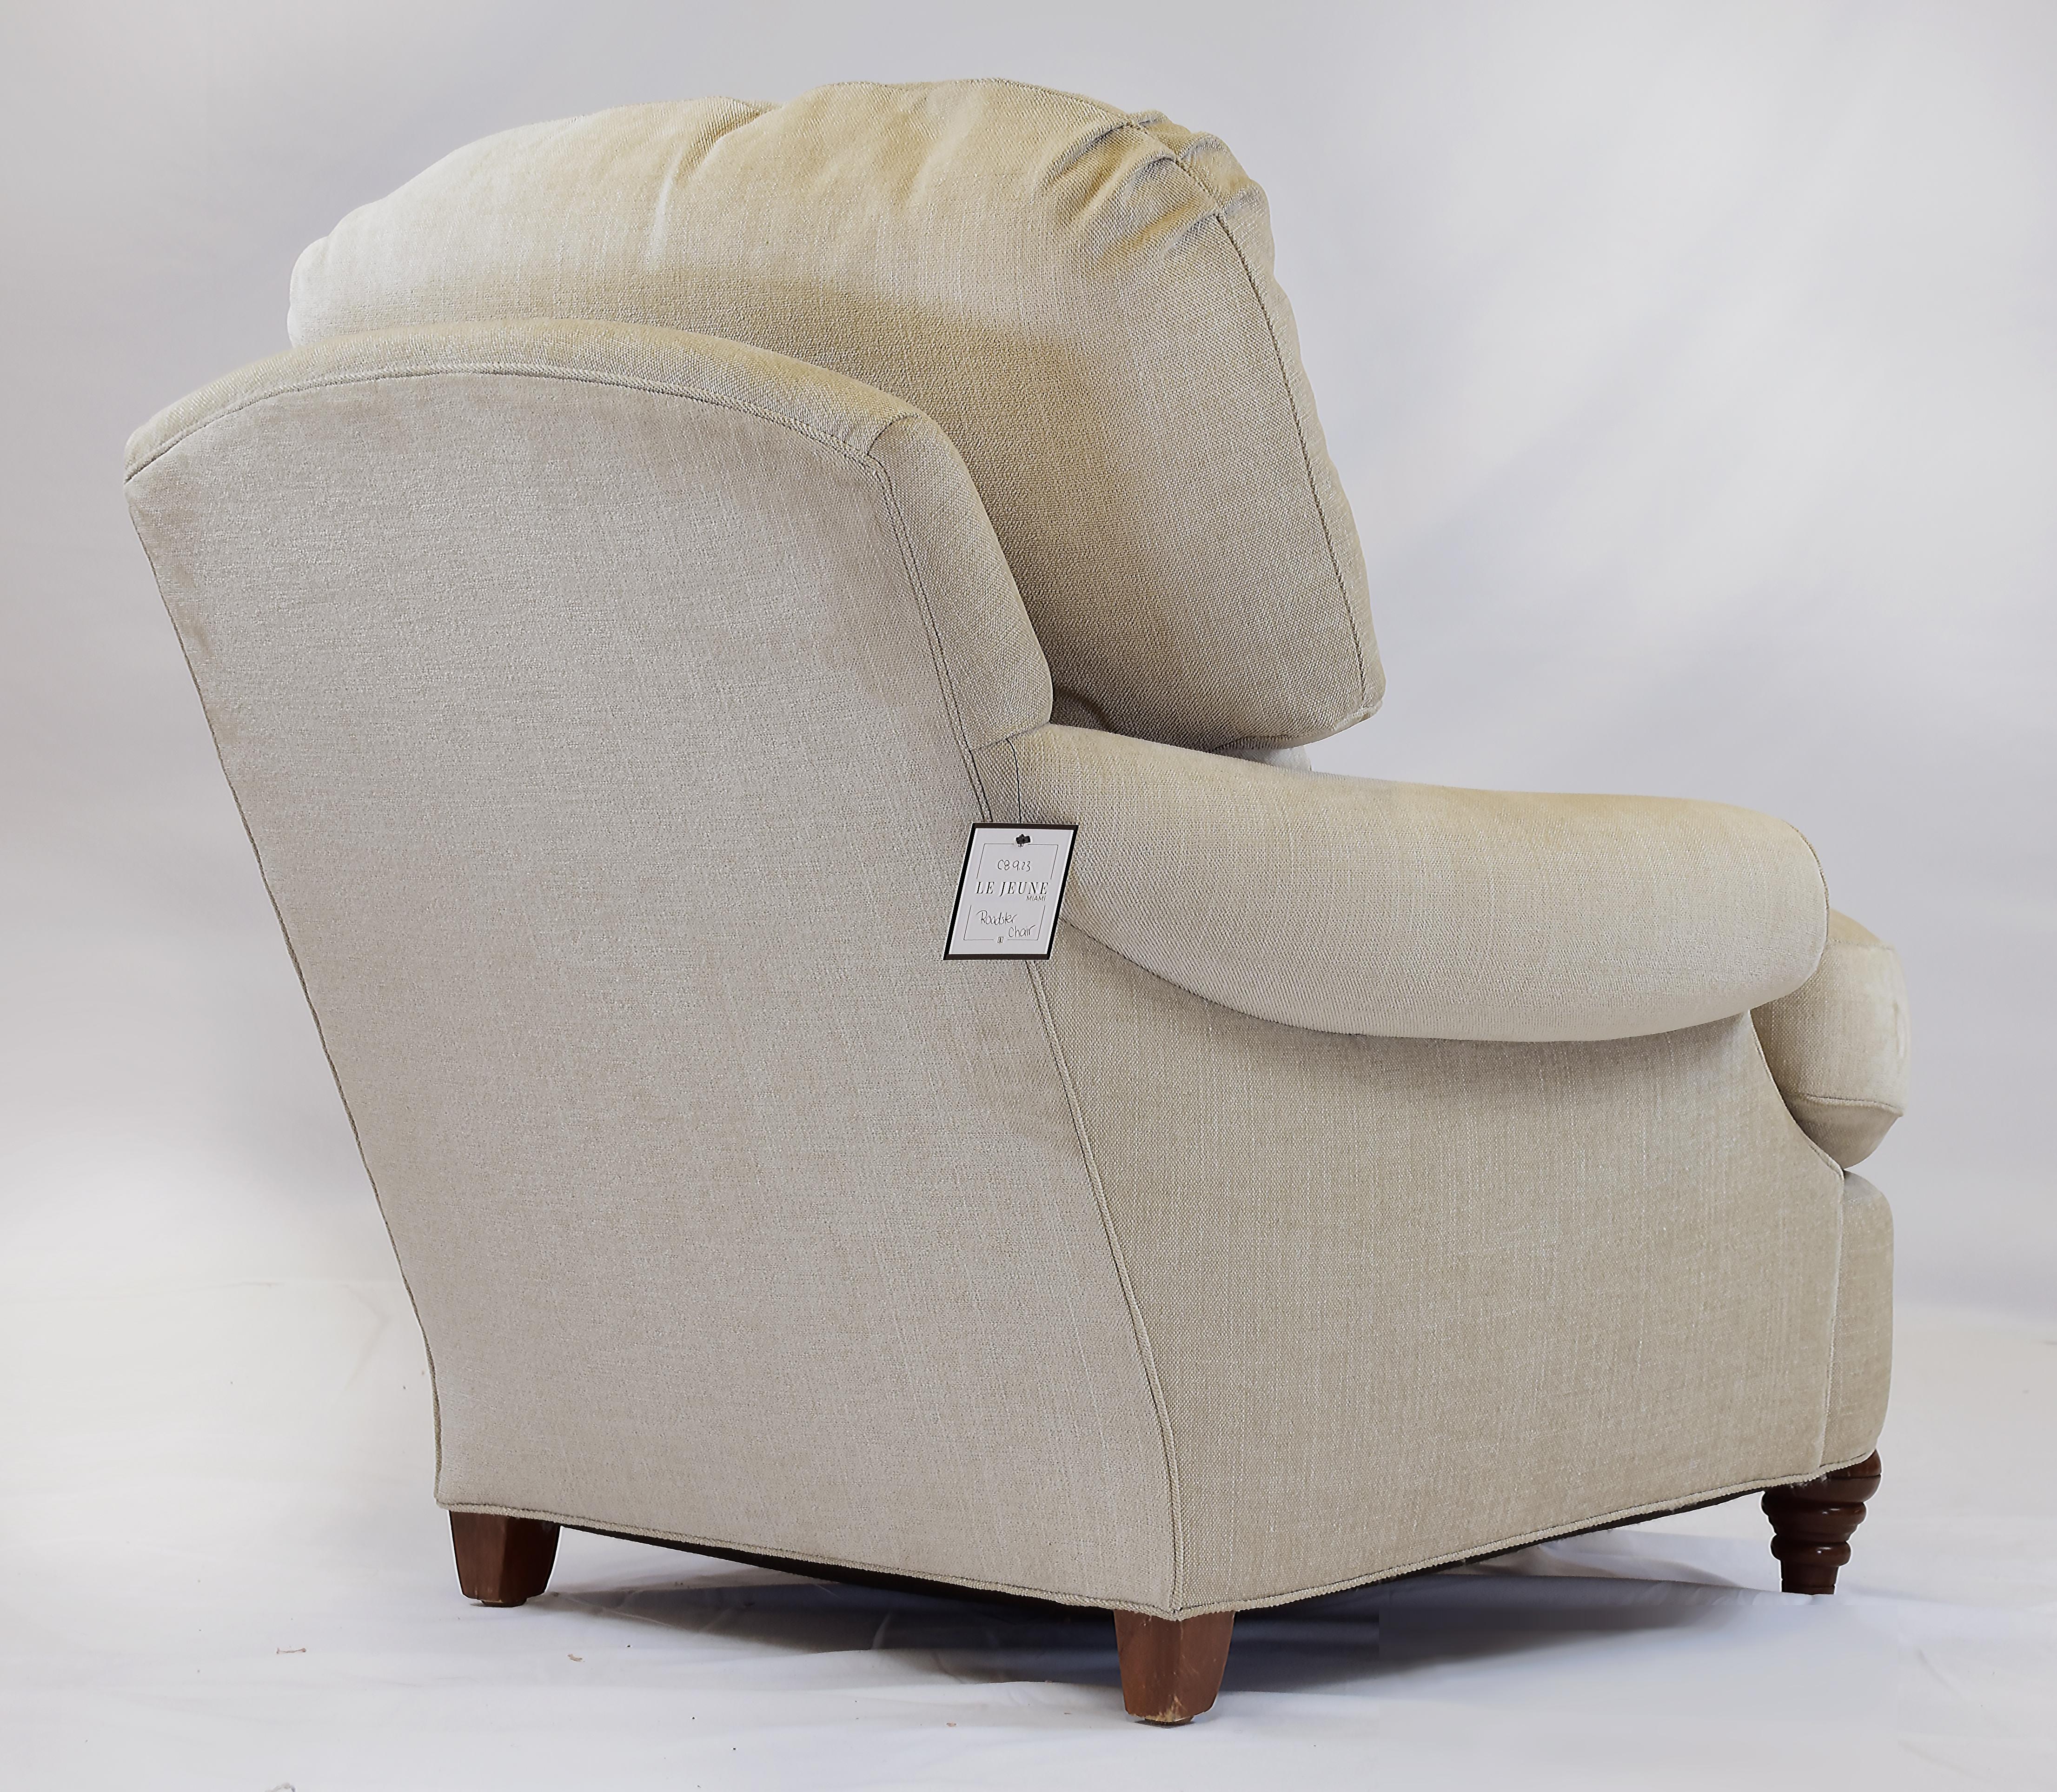 Turned Le Jeune Upholstery Roadster Lounge Chair Showroom Model in Chenille For Sale